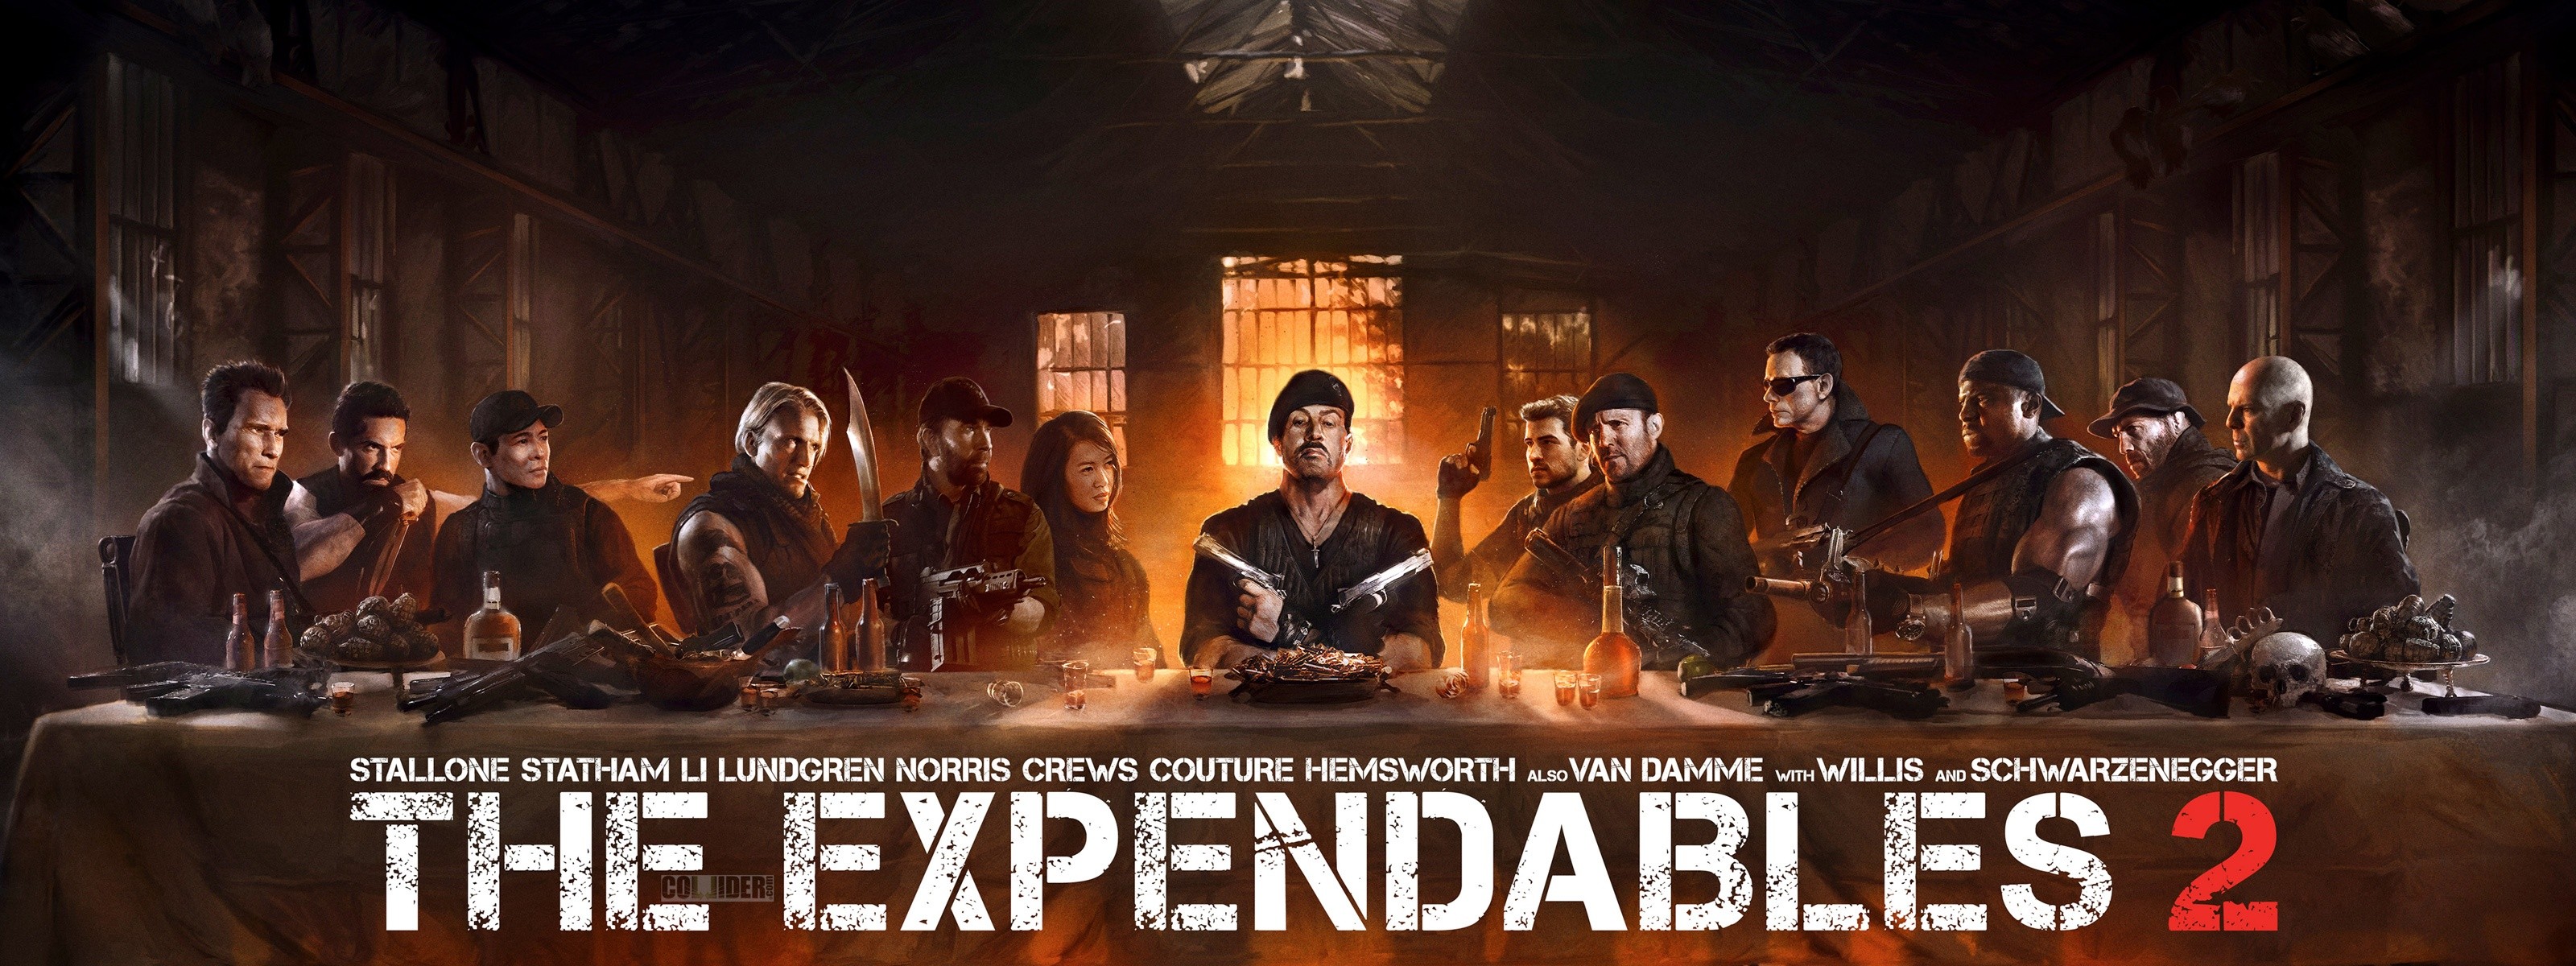 Expendables 2 The Last Supper Wallpapers